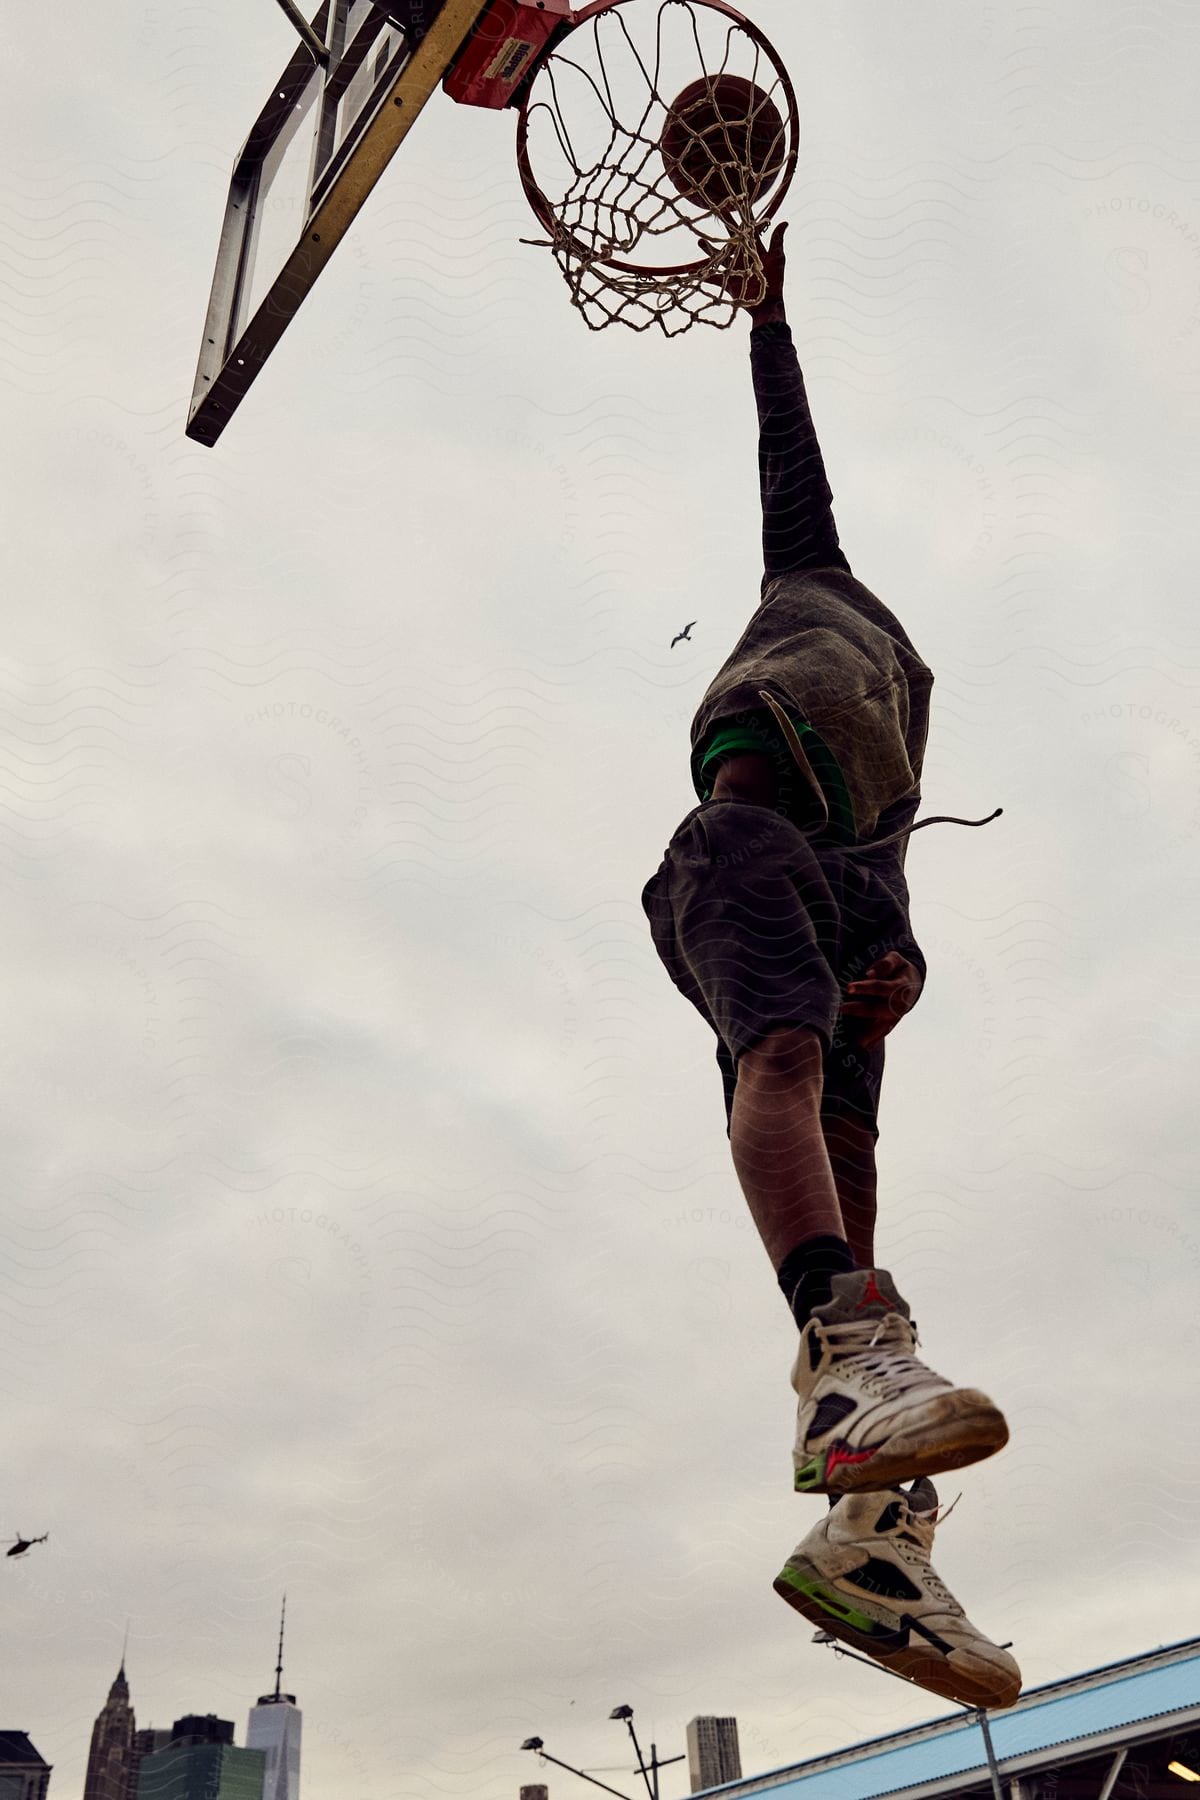 A man is performing a basketball dunk outdoors during the day